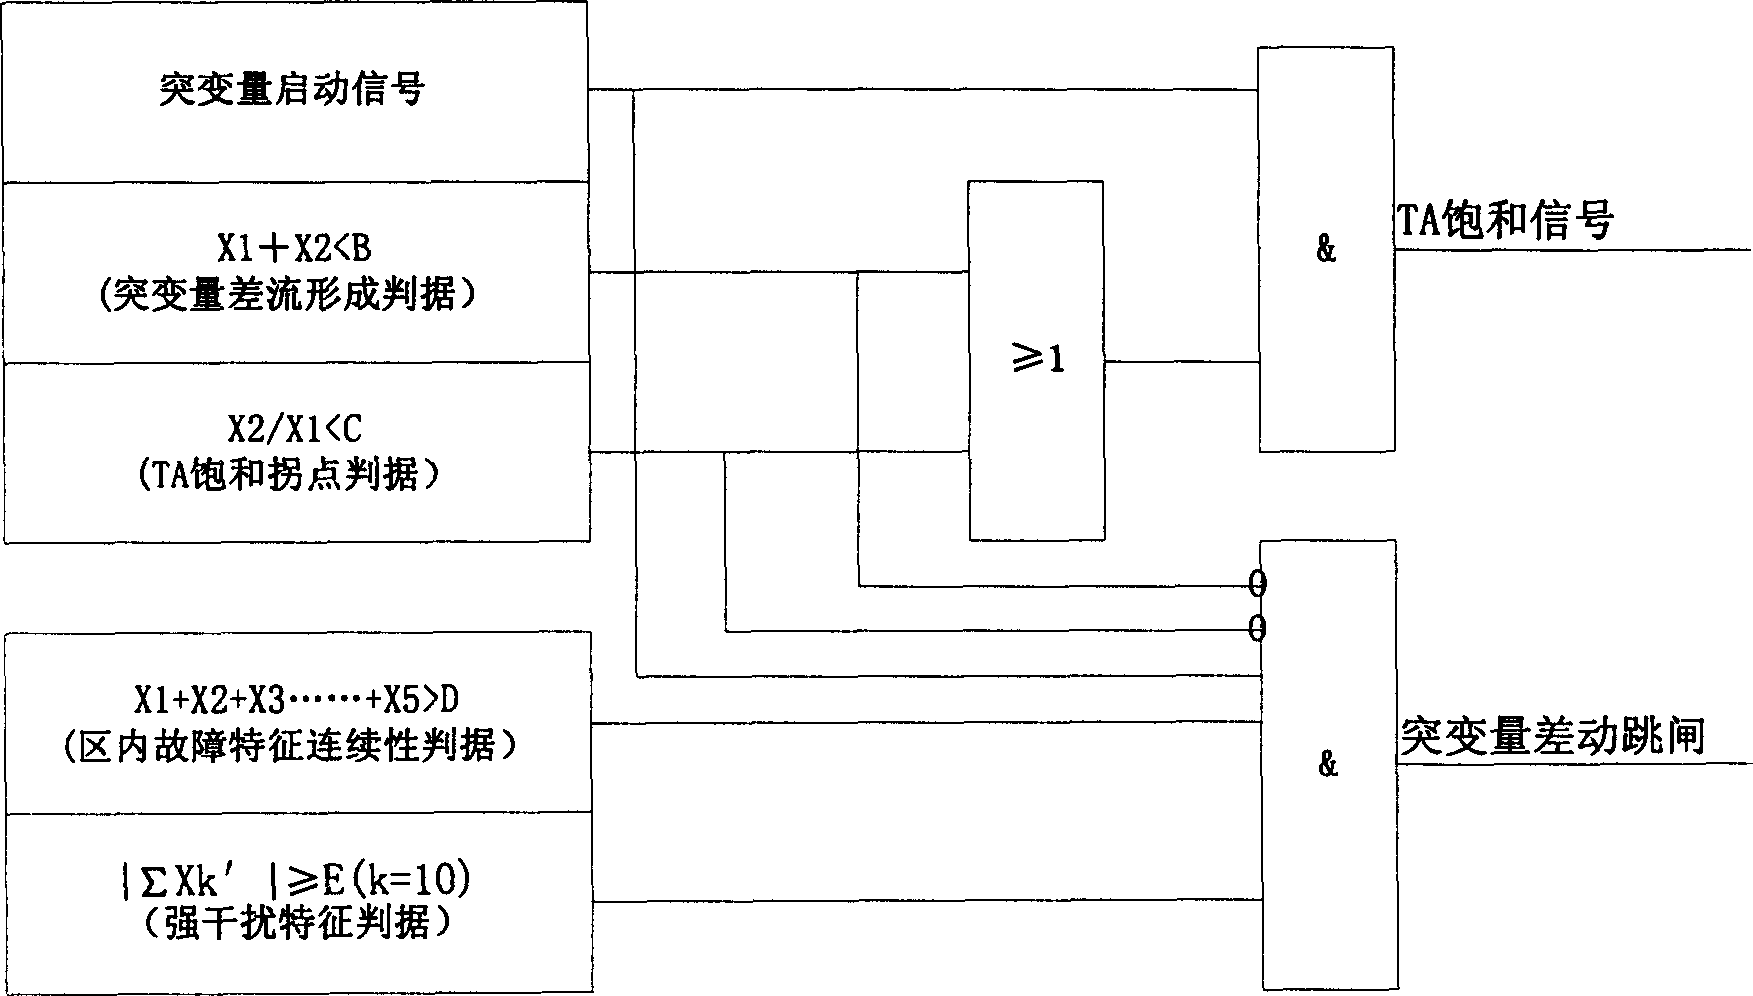 Anti-current mutual-inductor saturated suddenly-changed quantity difference current dynamic recollecting discrimination method